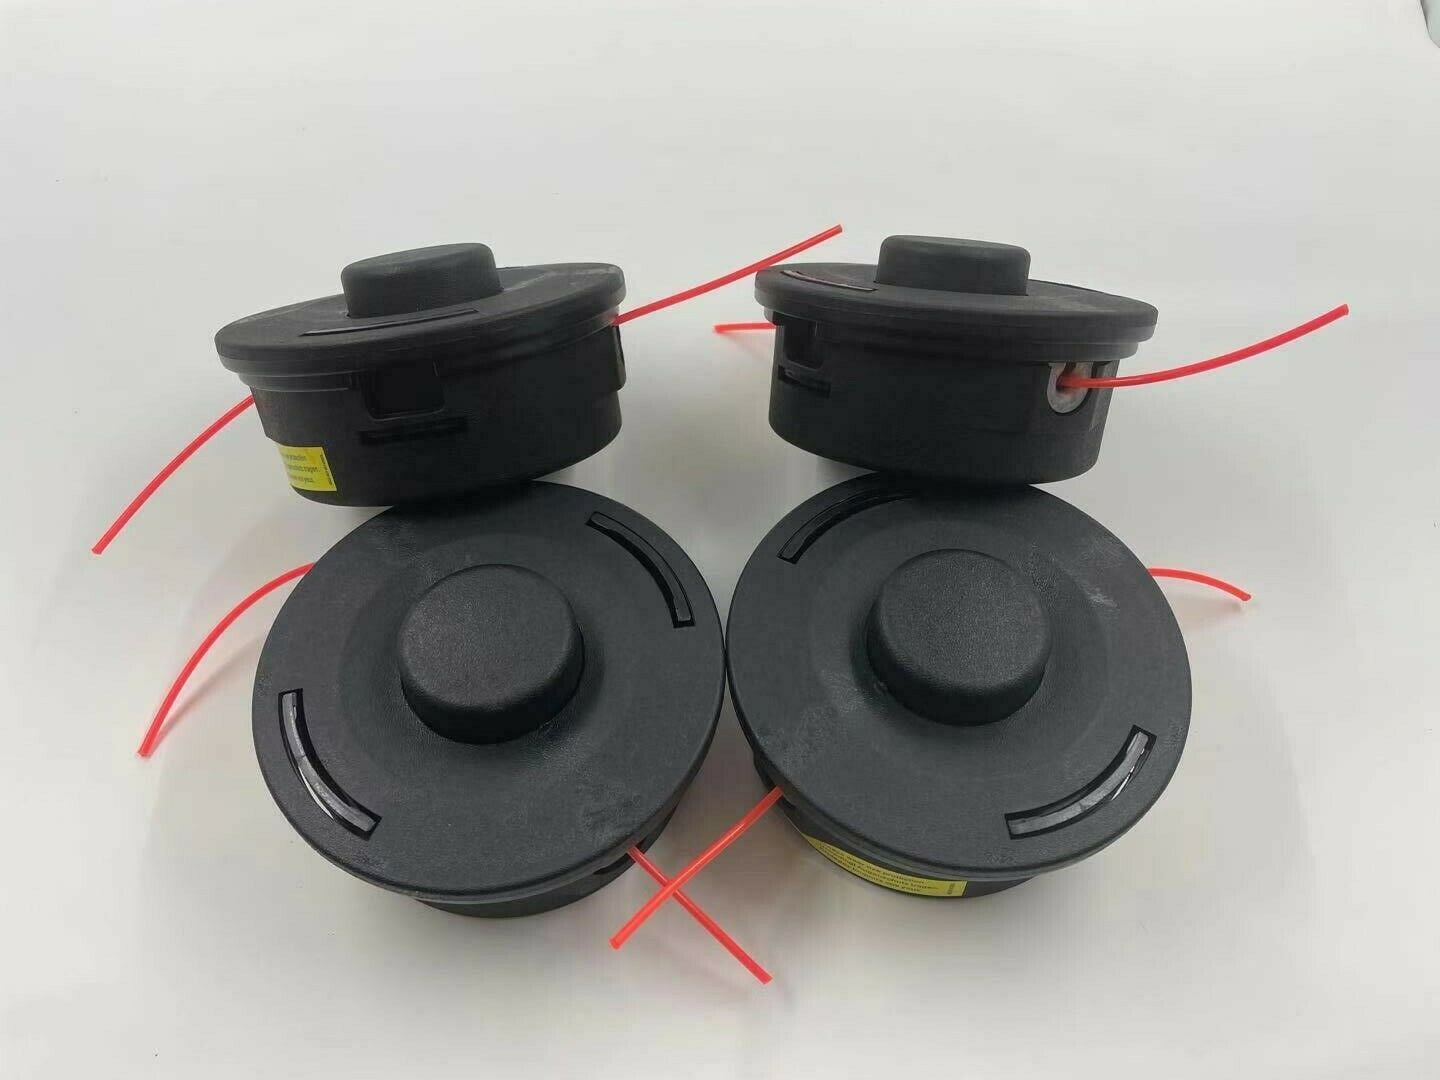 4 PACK Replacment Weed Eater Trimmer Head for Stihl FS 44 55 56 70